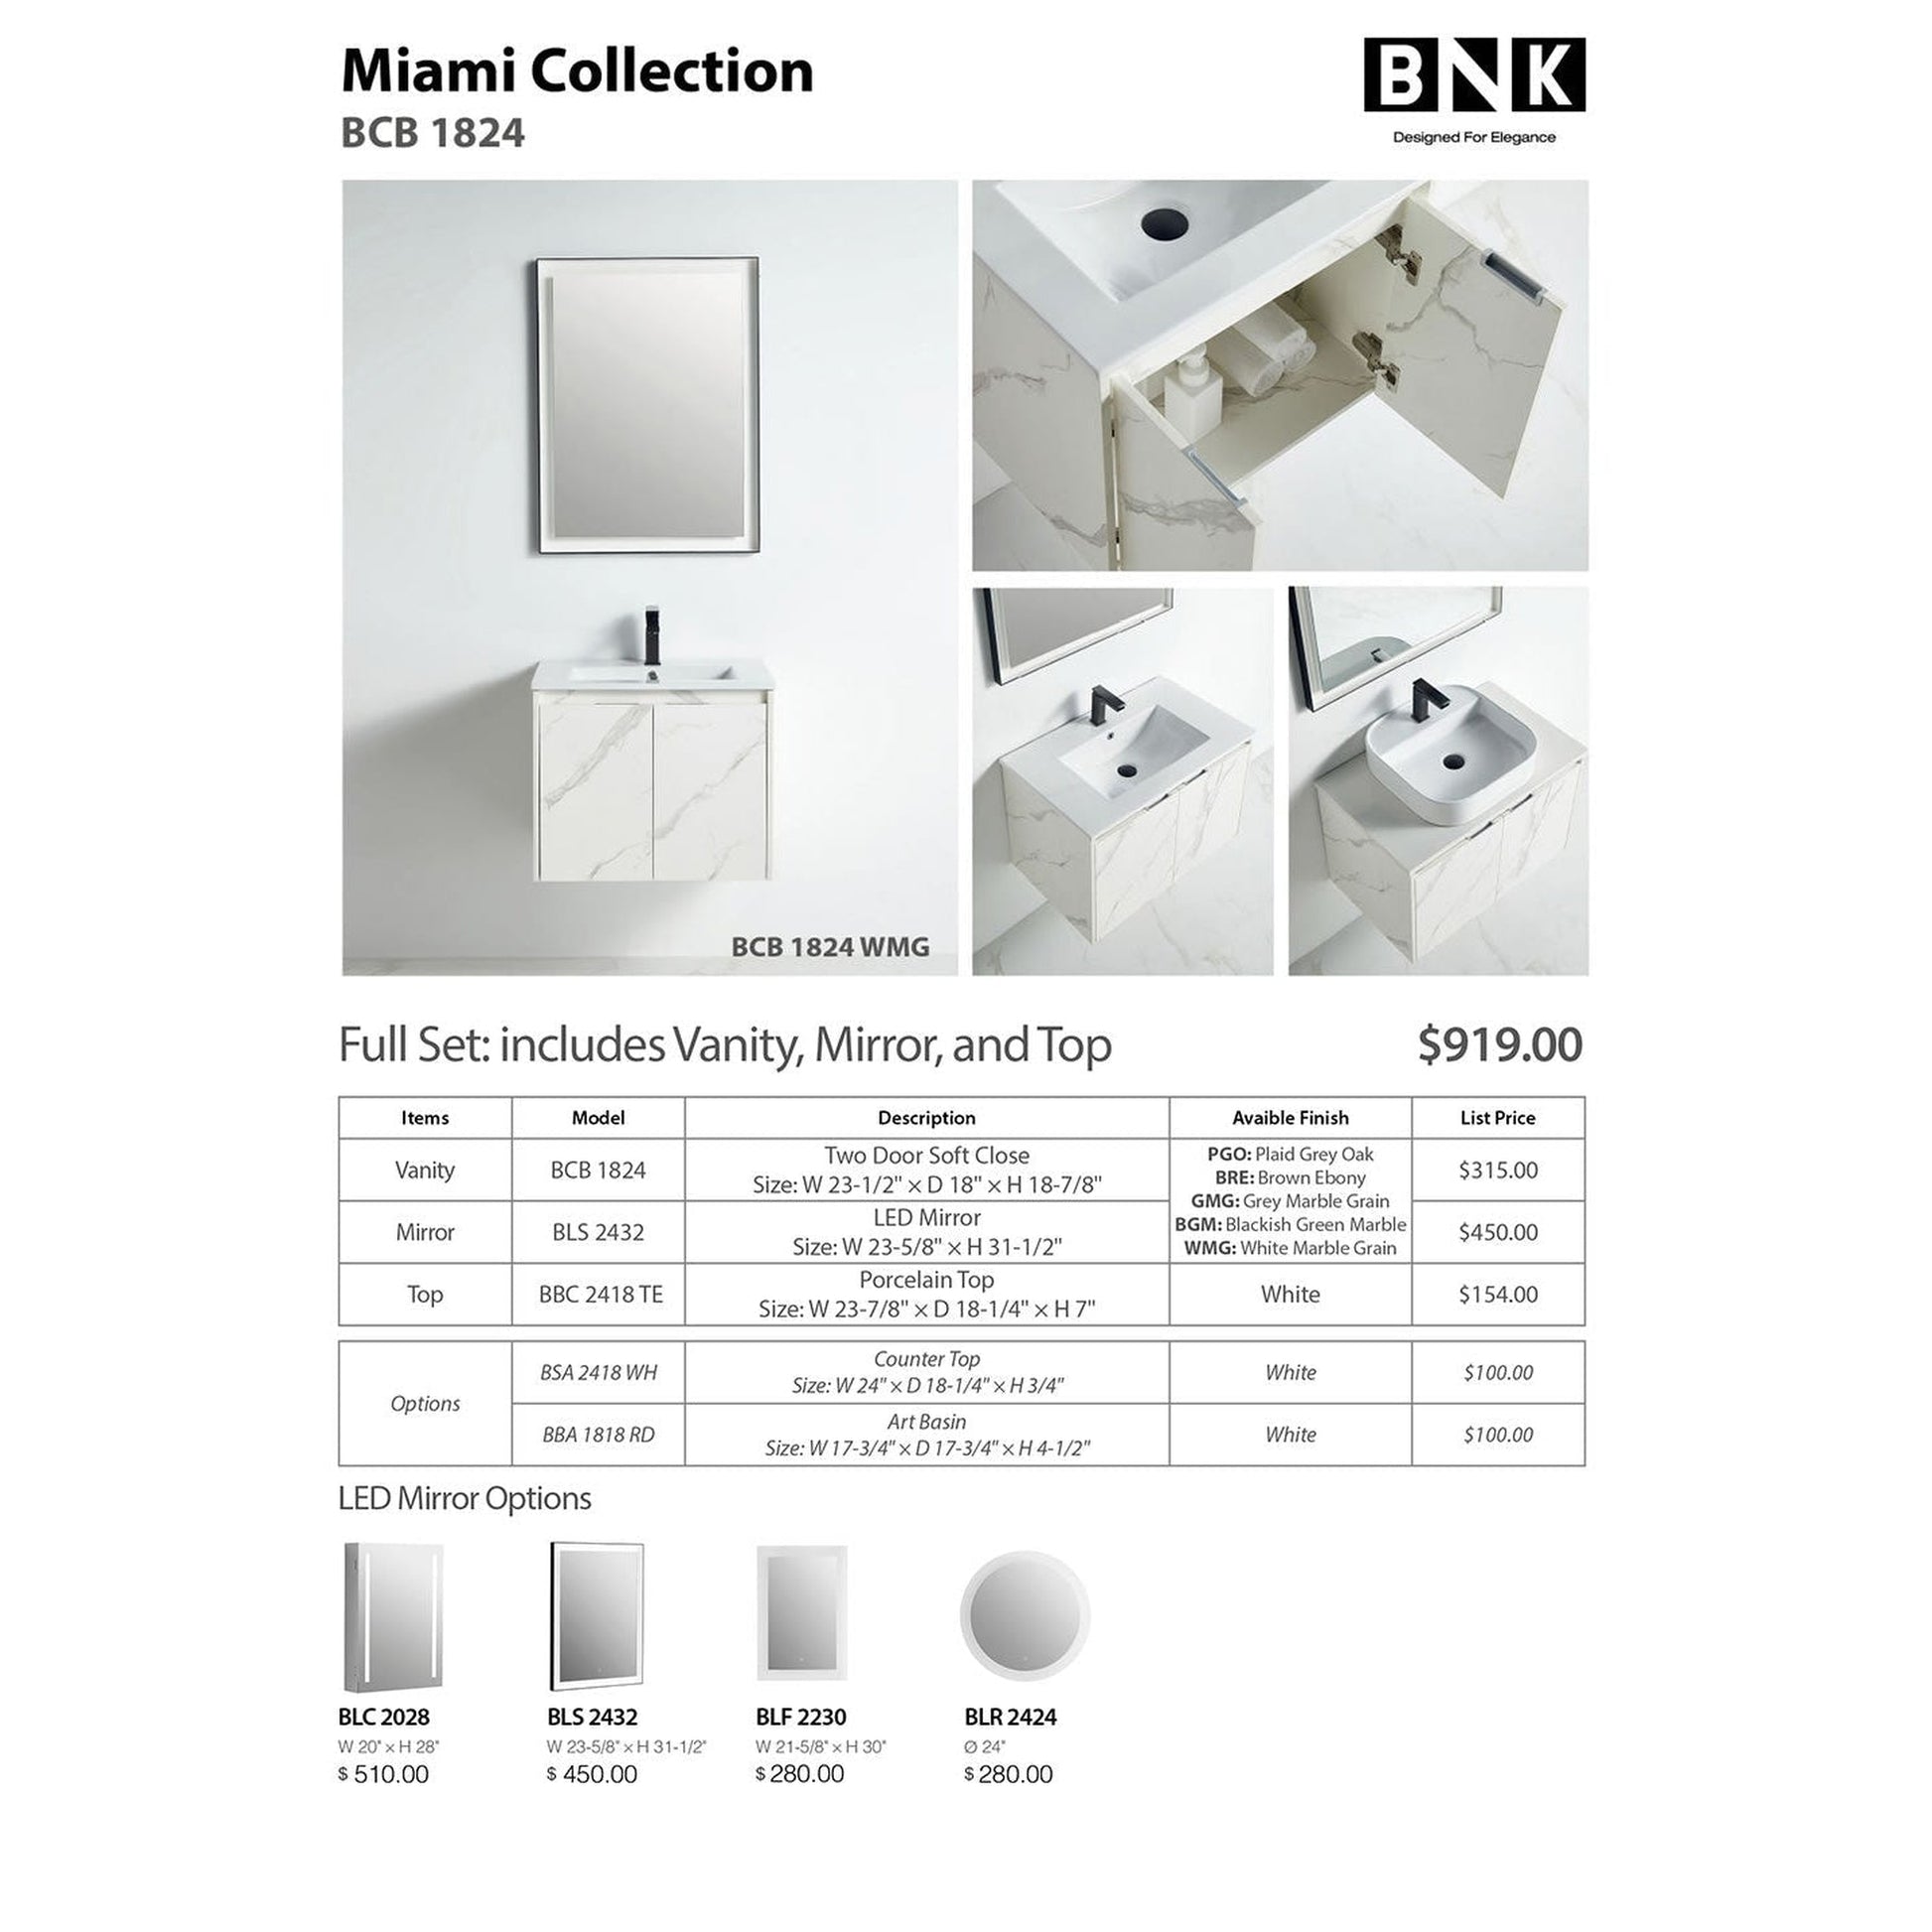 BNK BCB1824WMG Miami White Mable Grain Vanity Only Two-Door Soft Close